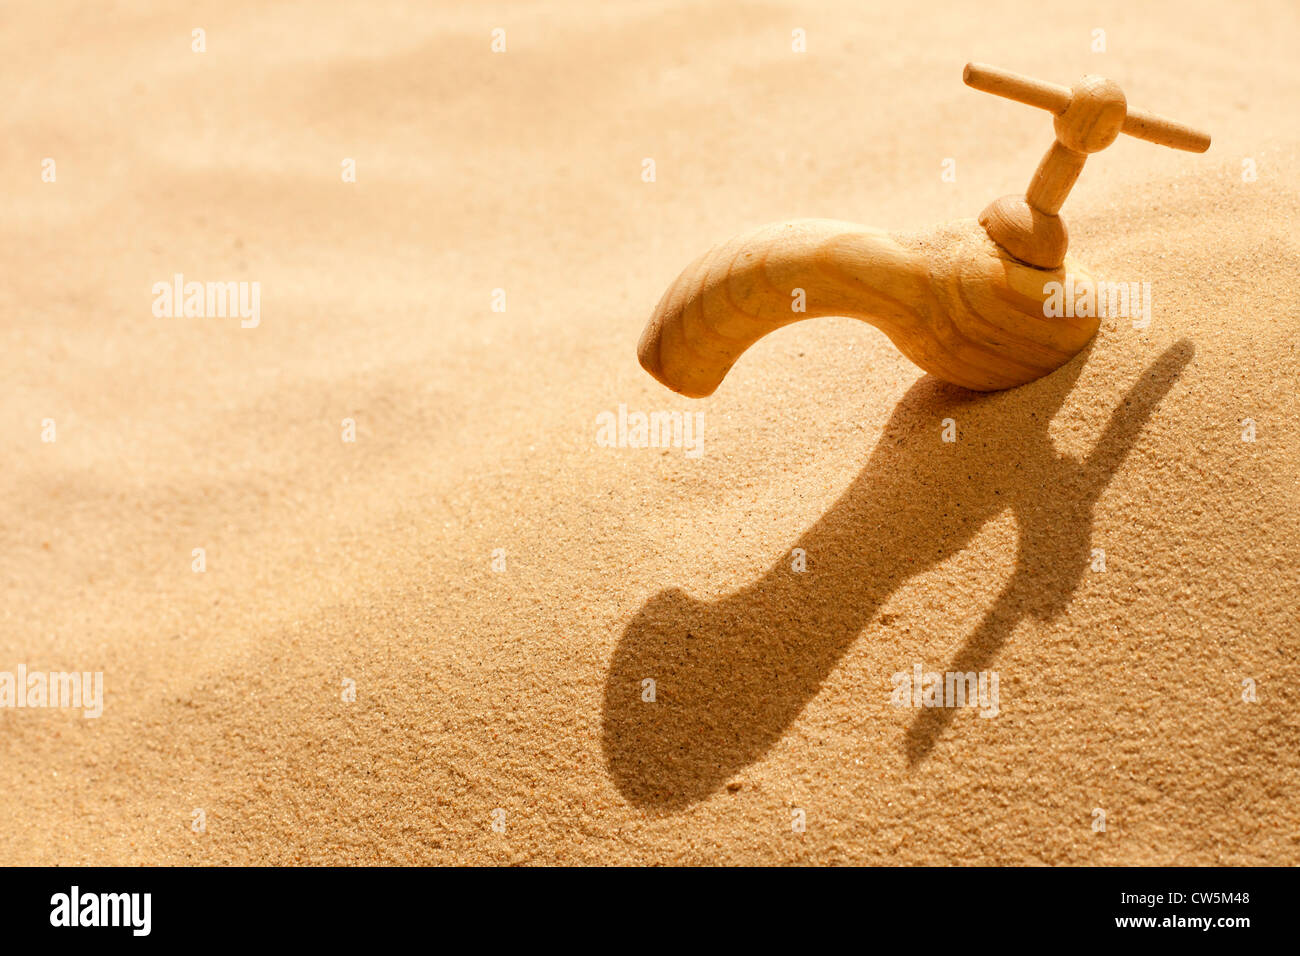 Global warming climate change faucet in the sand concept Stock Photo